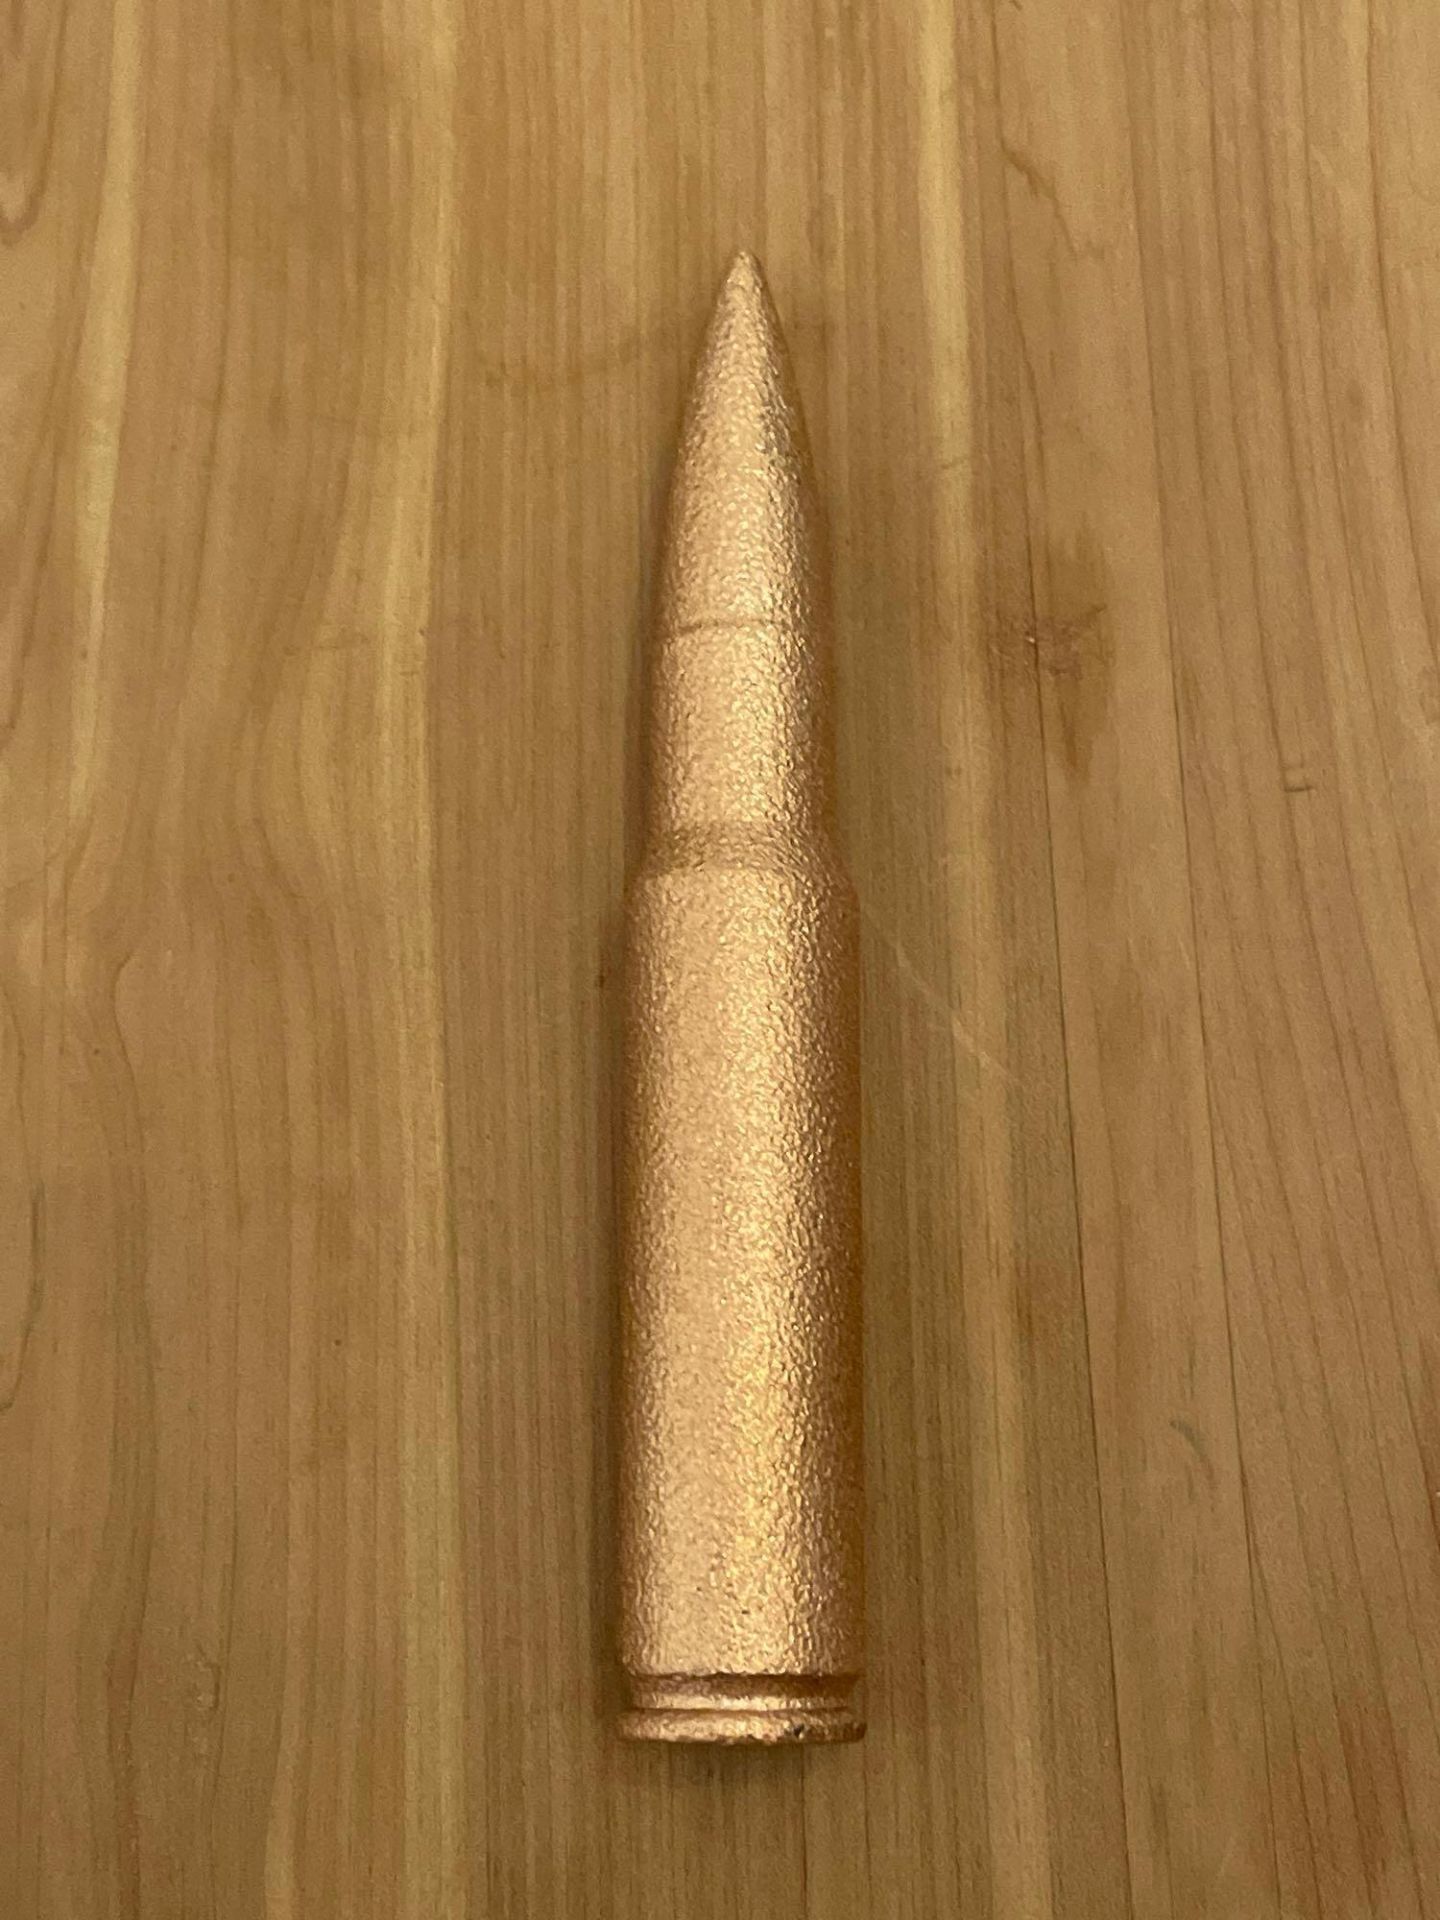 Copper Bullet & Rounds - Image 2 of 10